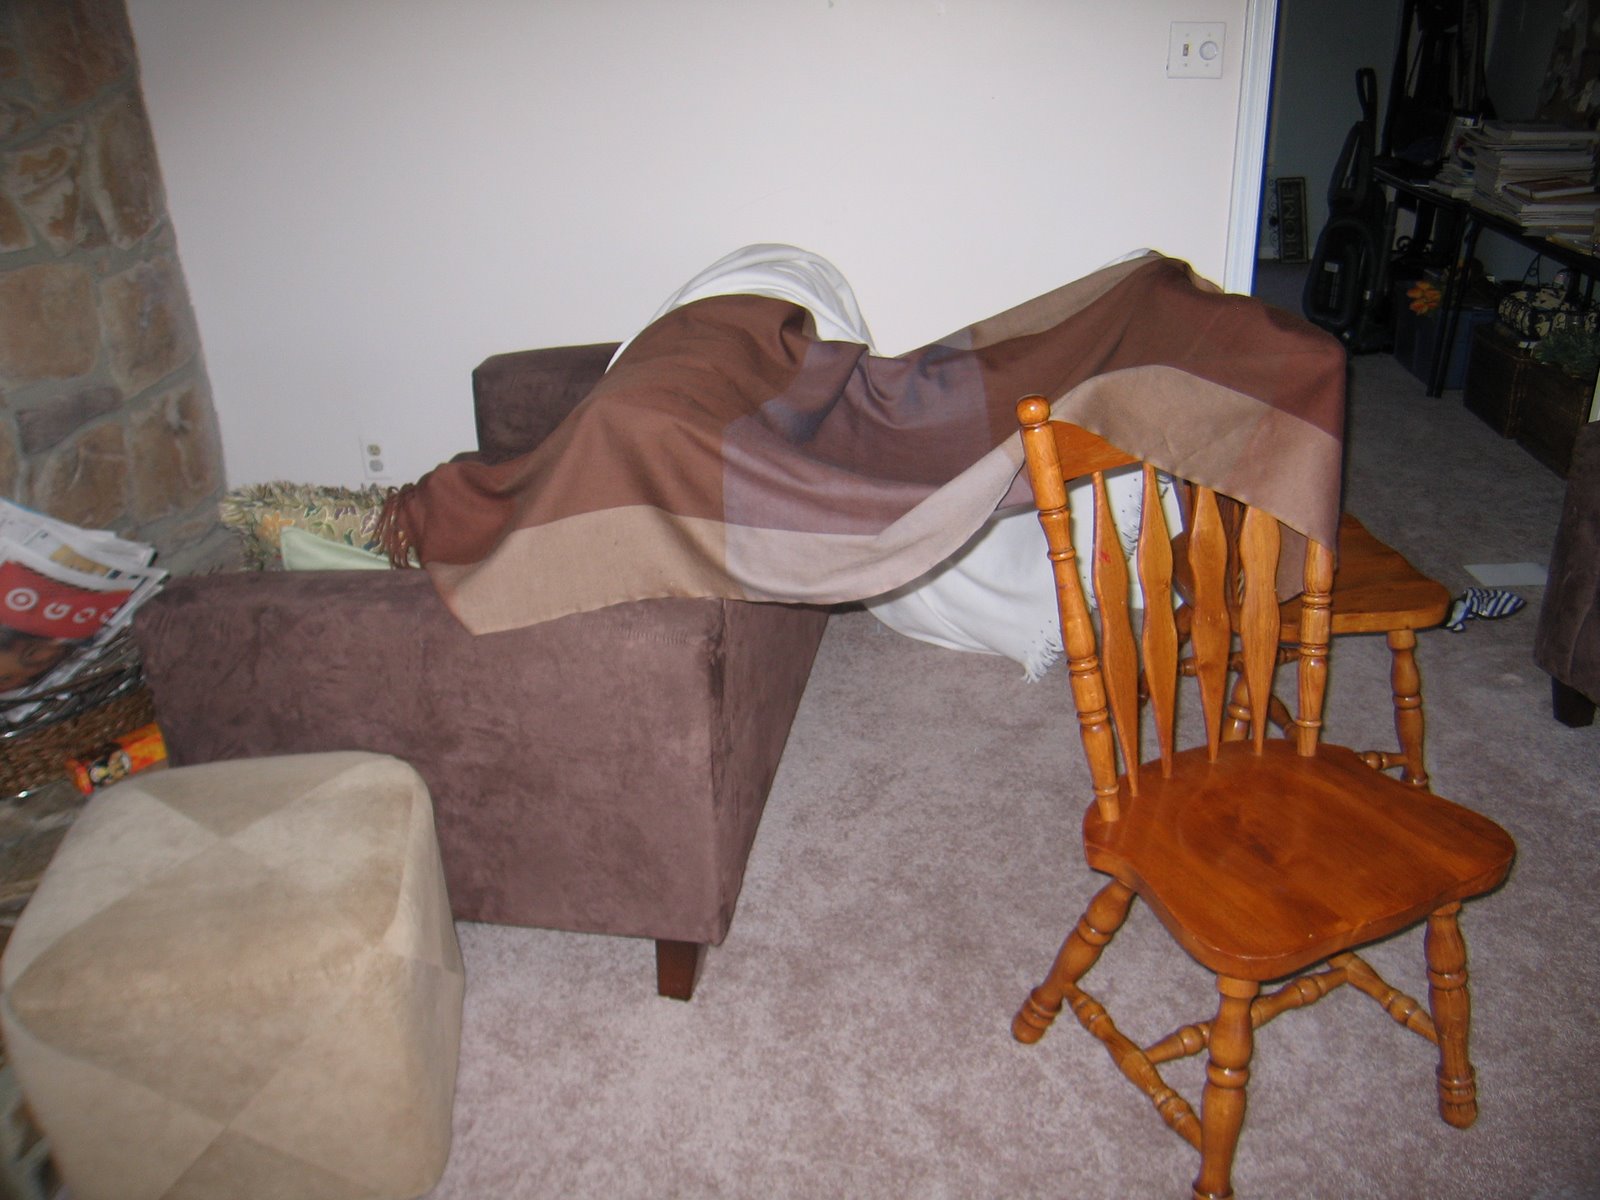 [2008+1+31+Our+First+Fort+002.jpg]